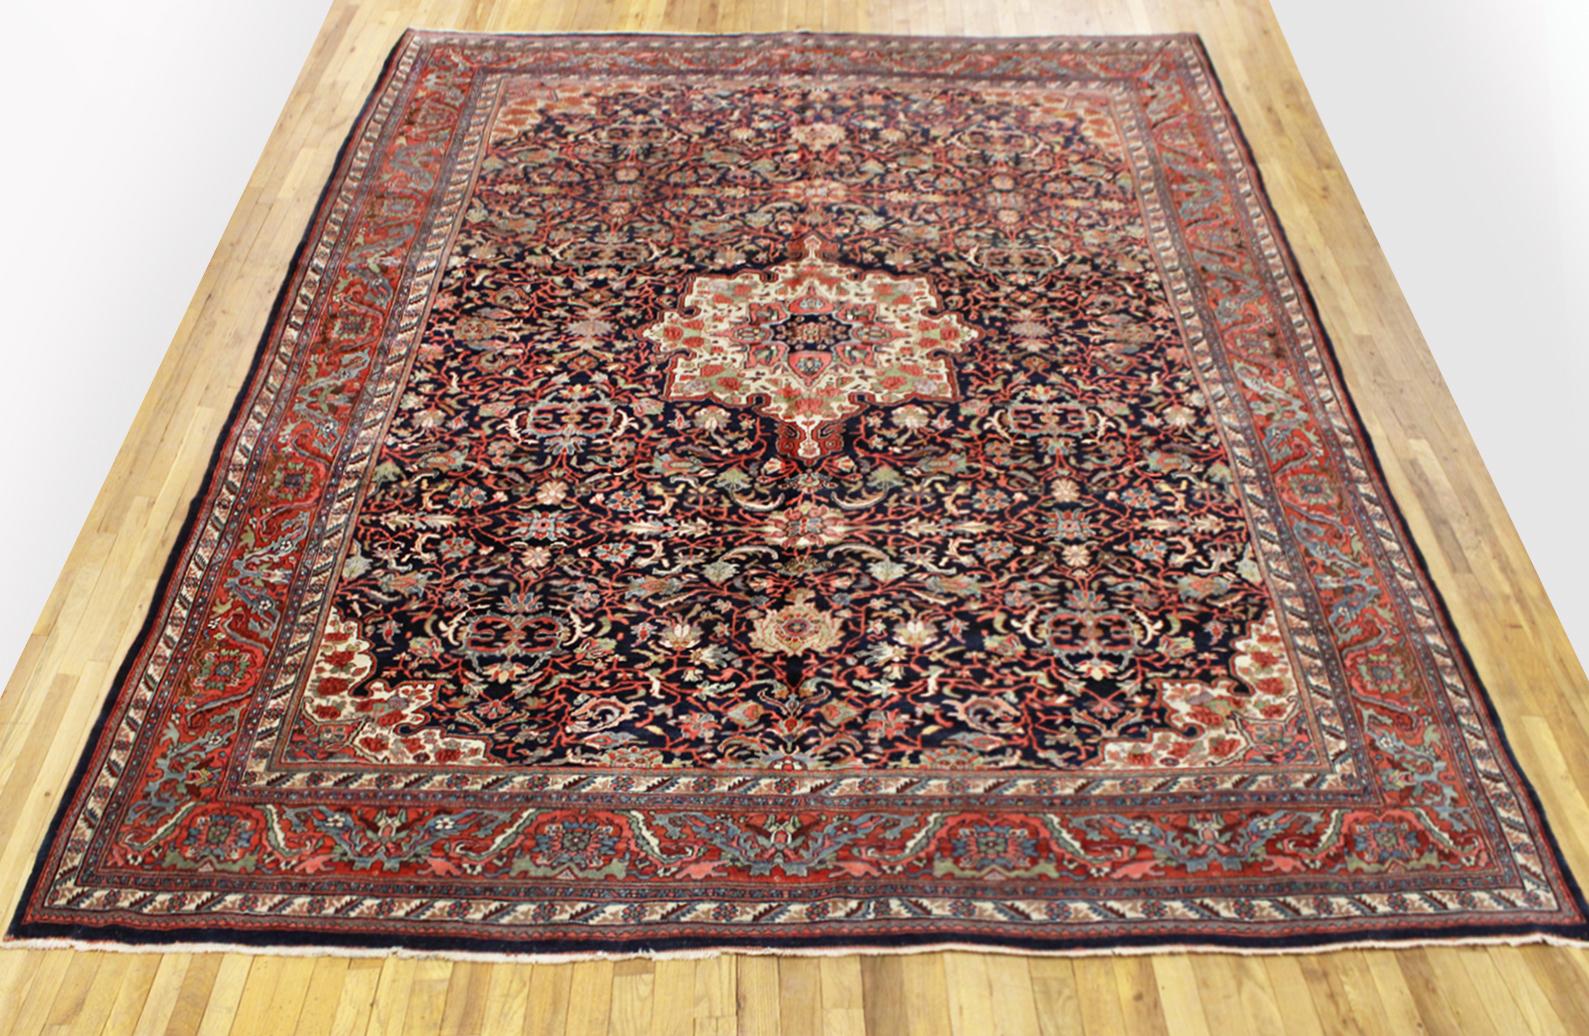 Antique Persian Bidjar rug, in room size, circa 1920.

A one-of-a-kind antique Persian Bidjar rug, hand-knotted with soft wool pile. Thiis lovely hand-knotted woll rug features a central medallion in the navy central field, with a delicate red